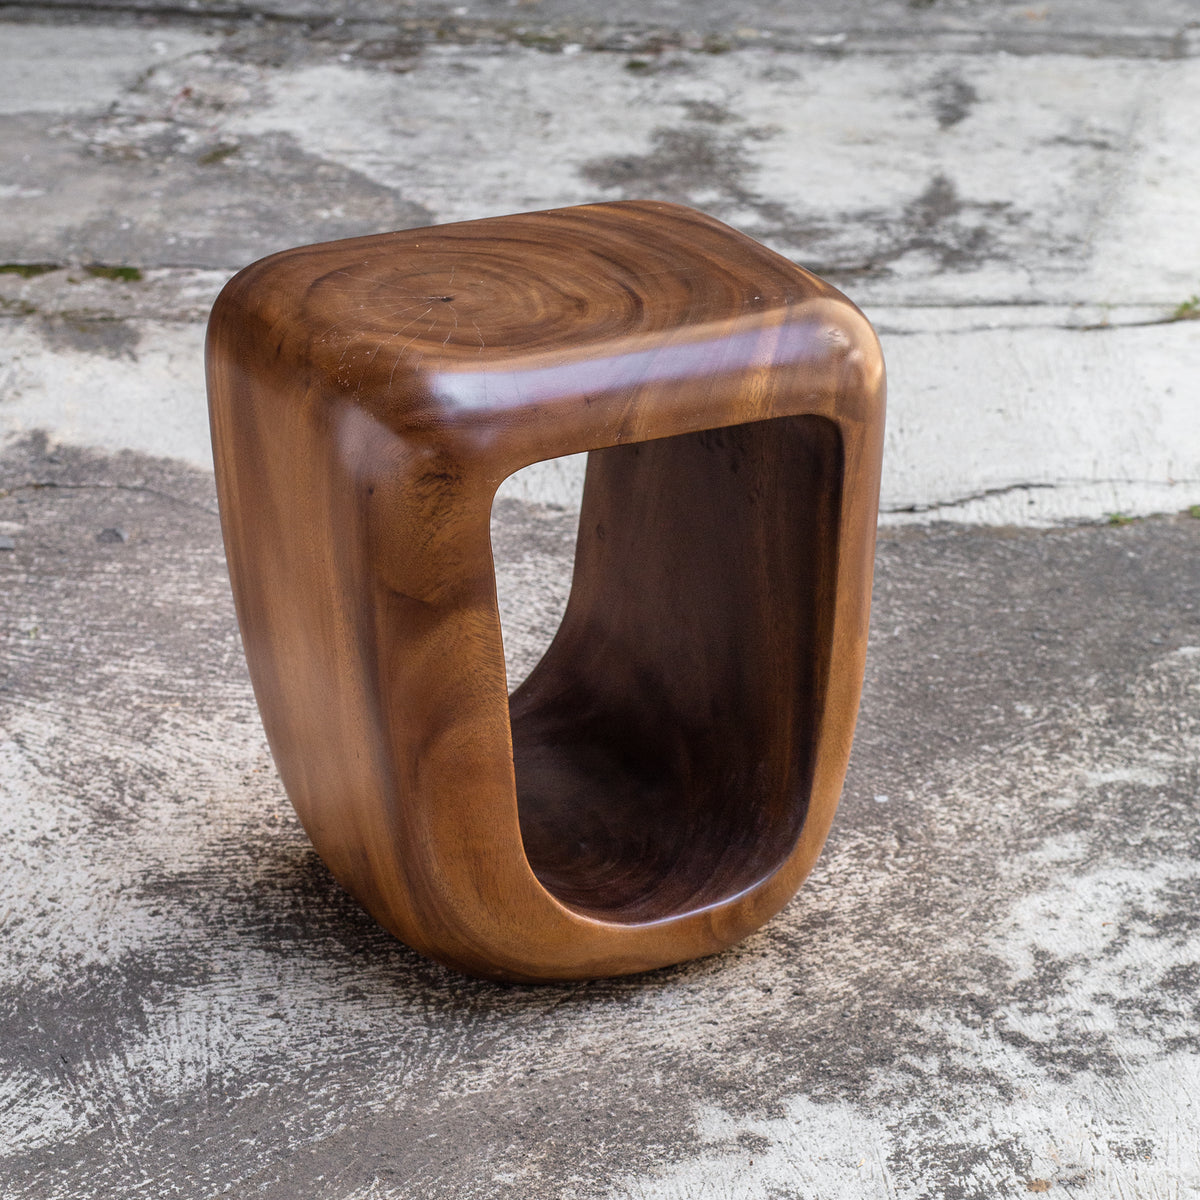 Uttermost Loophole Wooden Accent Stool